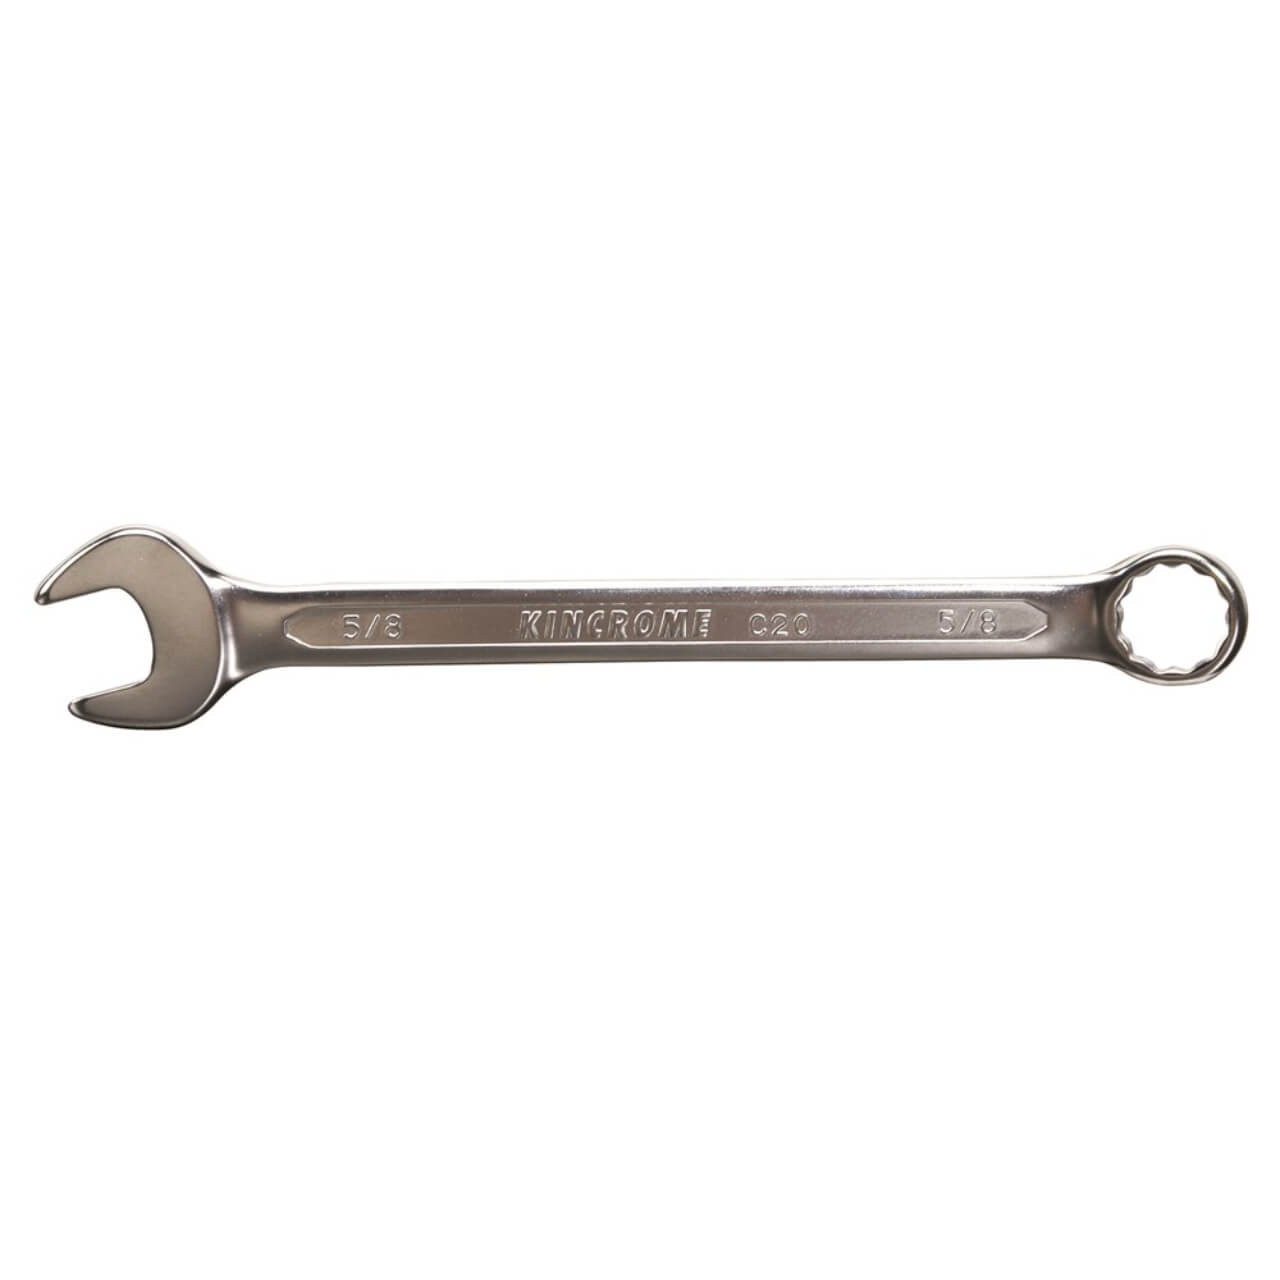 Kincrome 1-5/16 Combination ROE Spanner Imperial